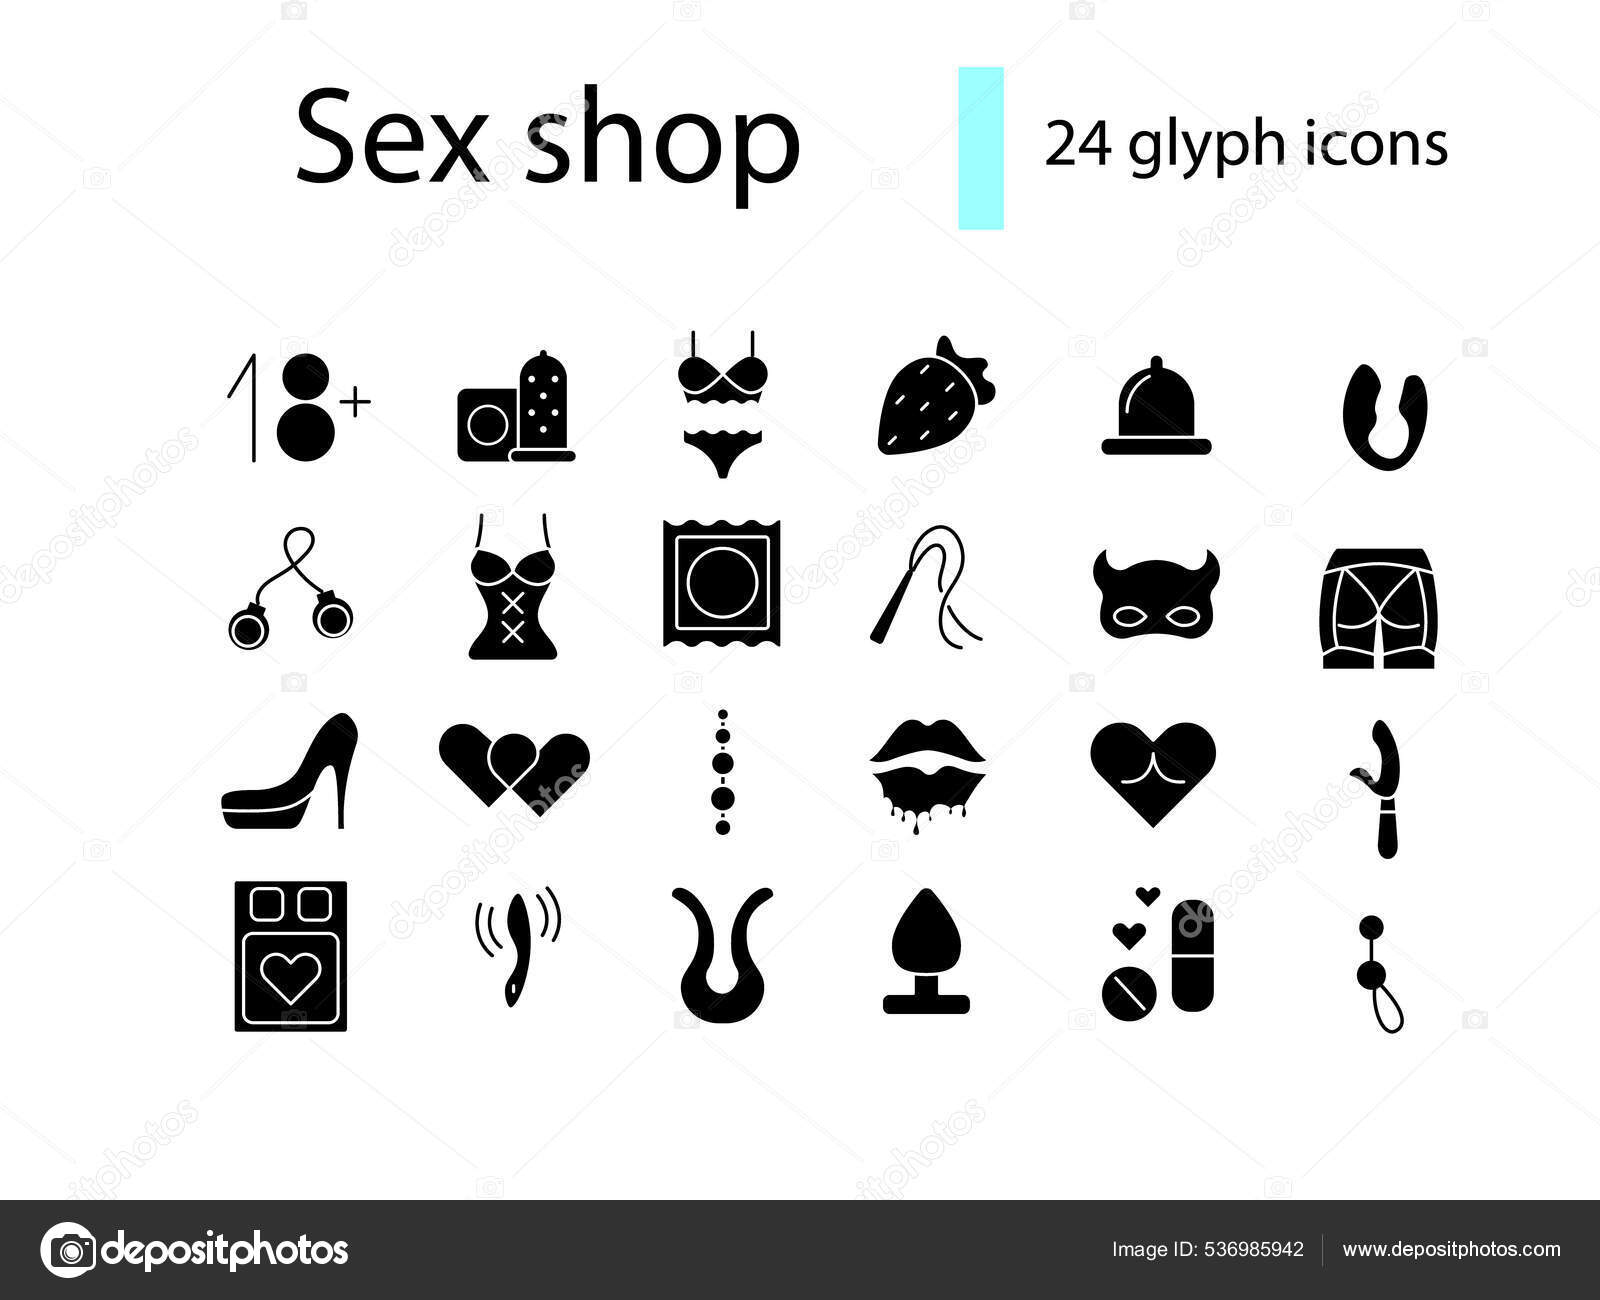 Erotic Goods Glyph Icons Set Sex Shop Adult Toys Products Stock Vector by ©agapeeva 536985942 pic photo